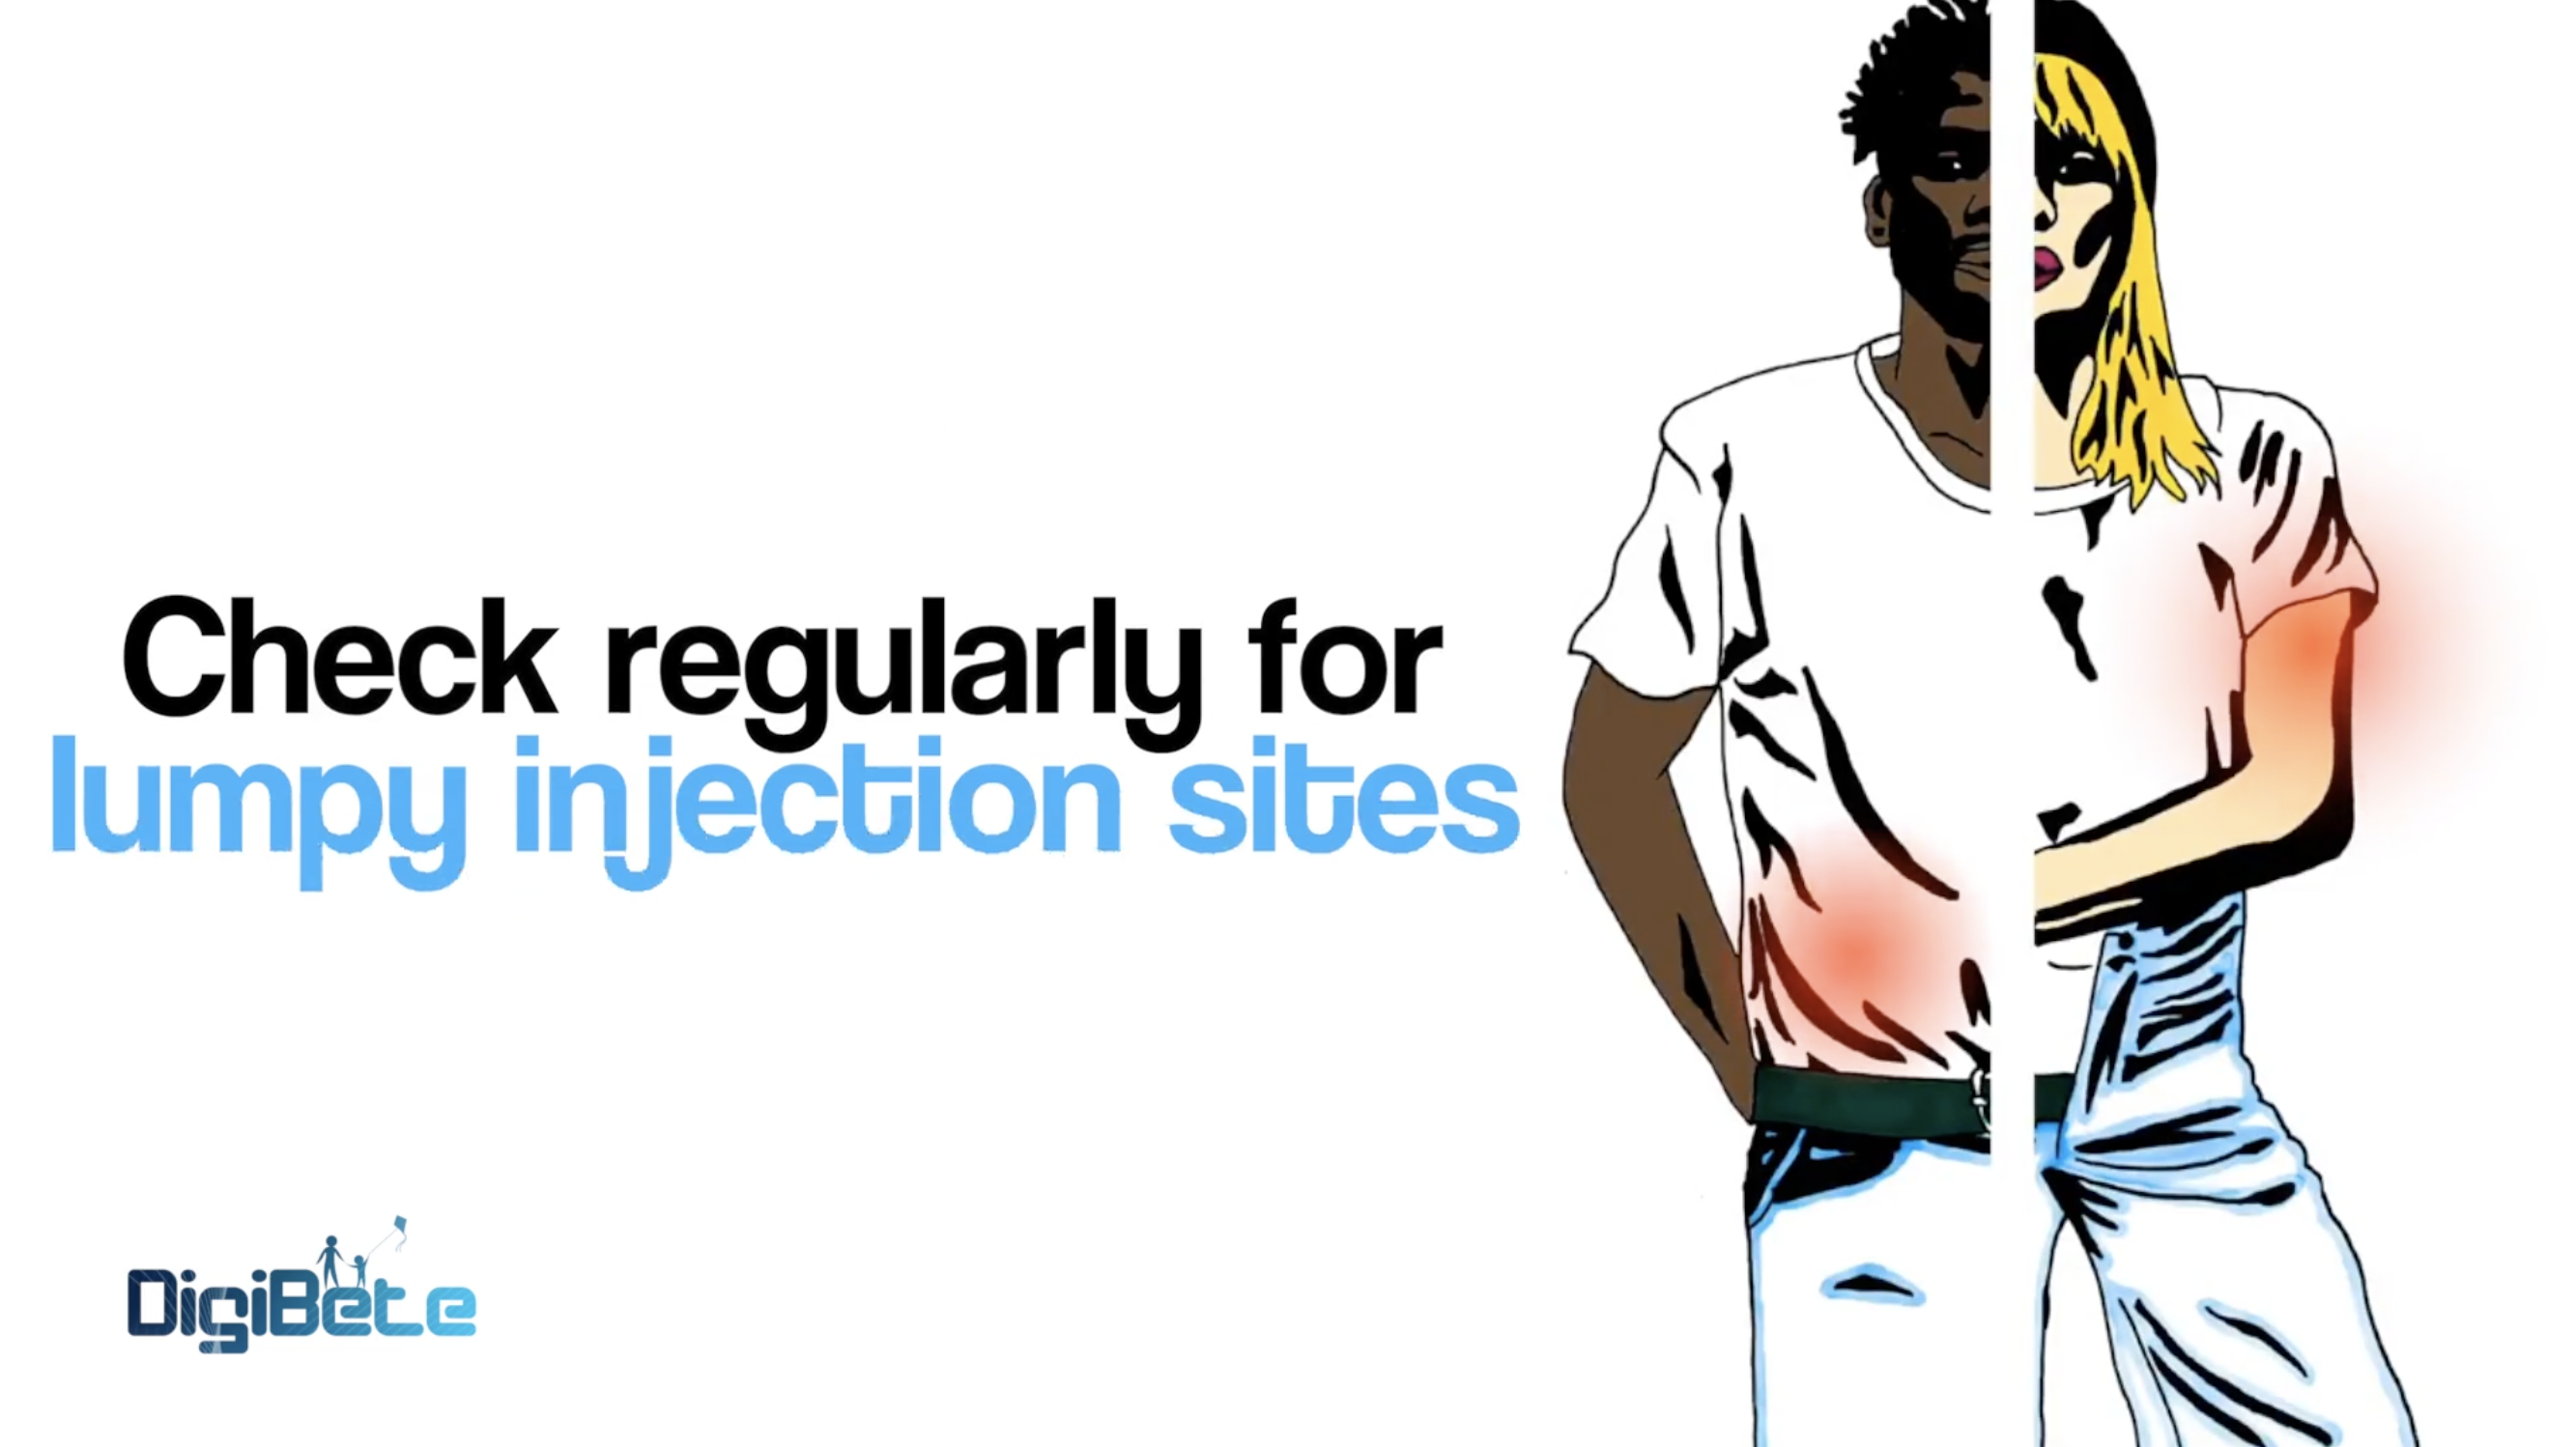 Diabetes Essentials : Check Regularly for Lumpy Injection Sites